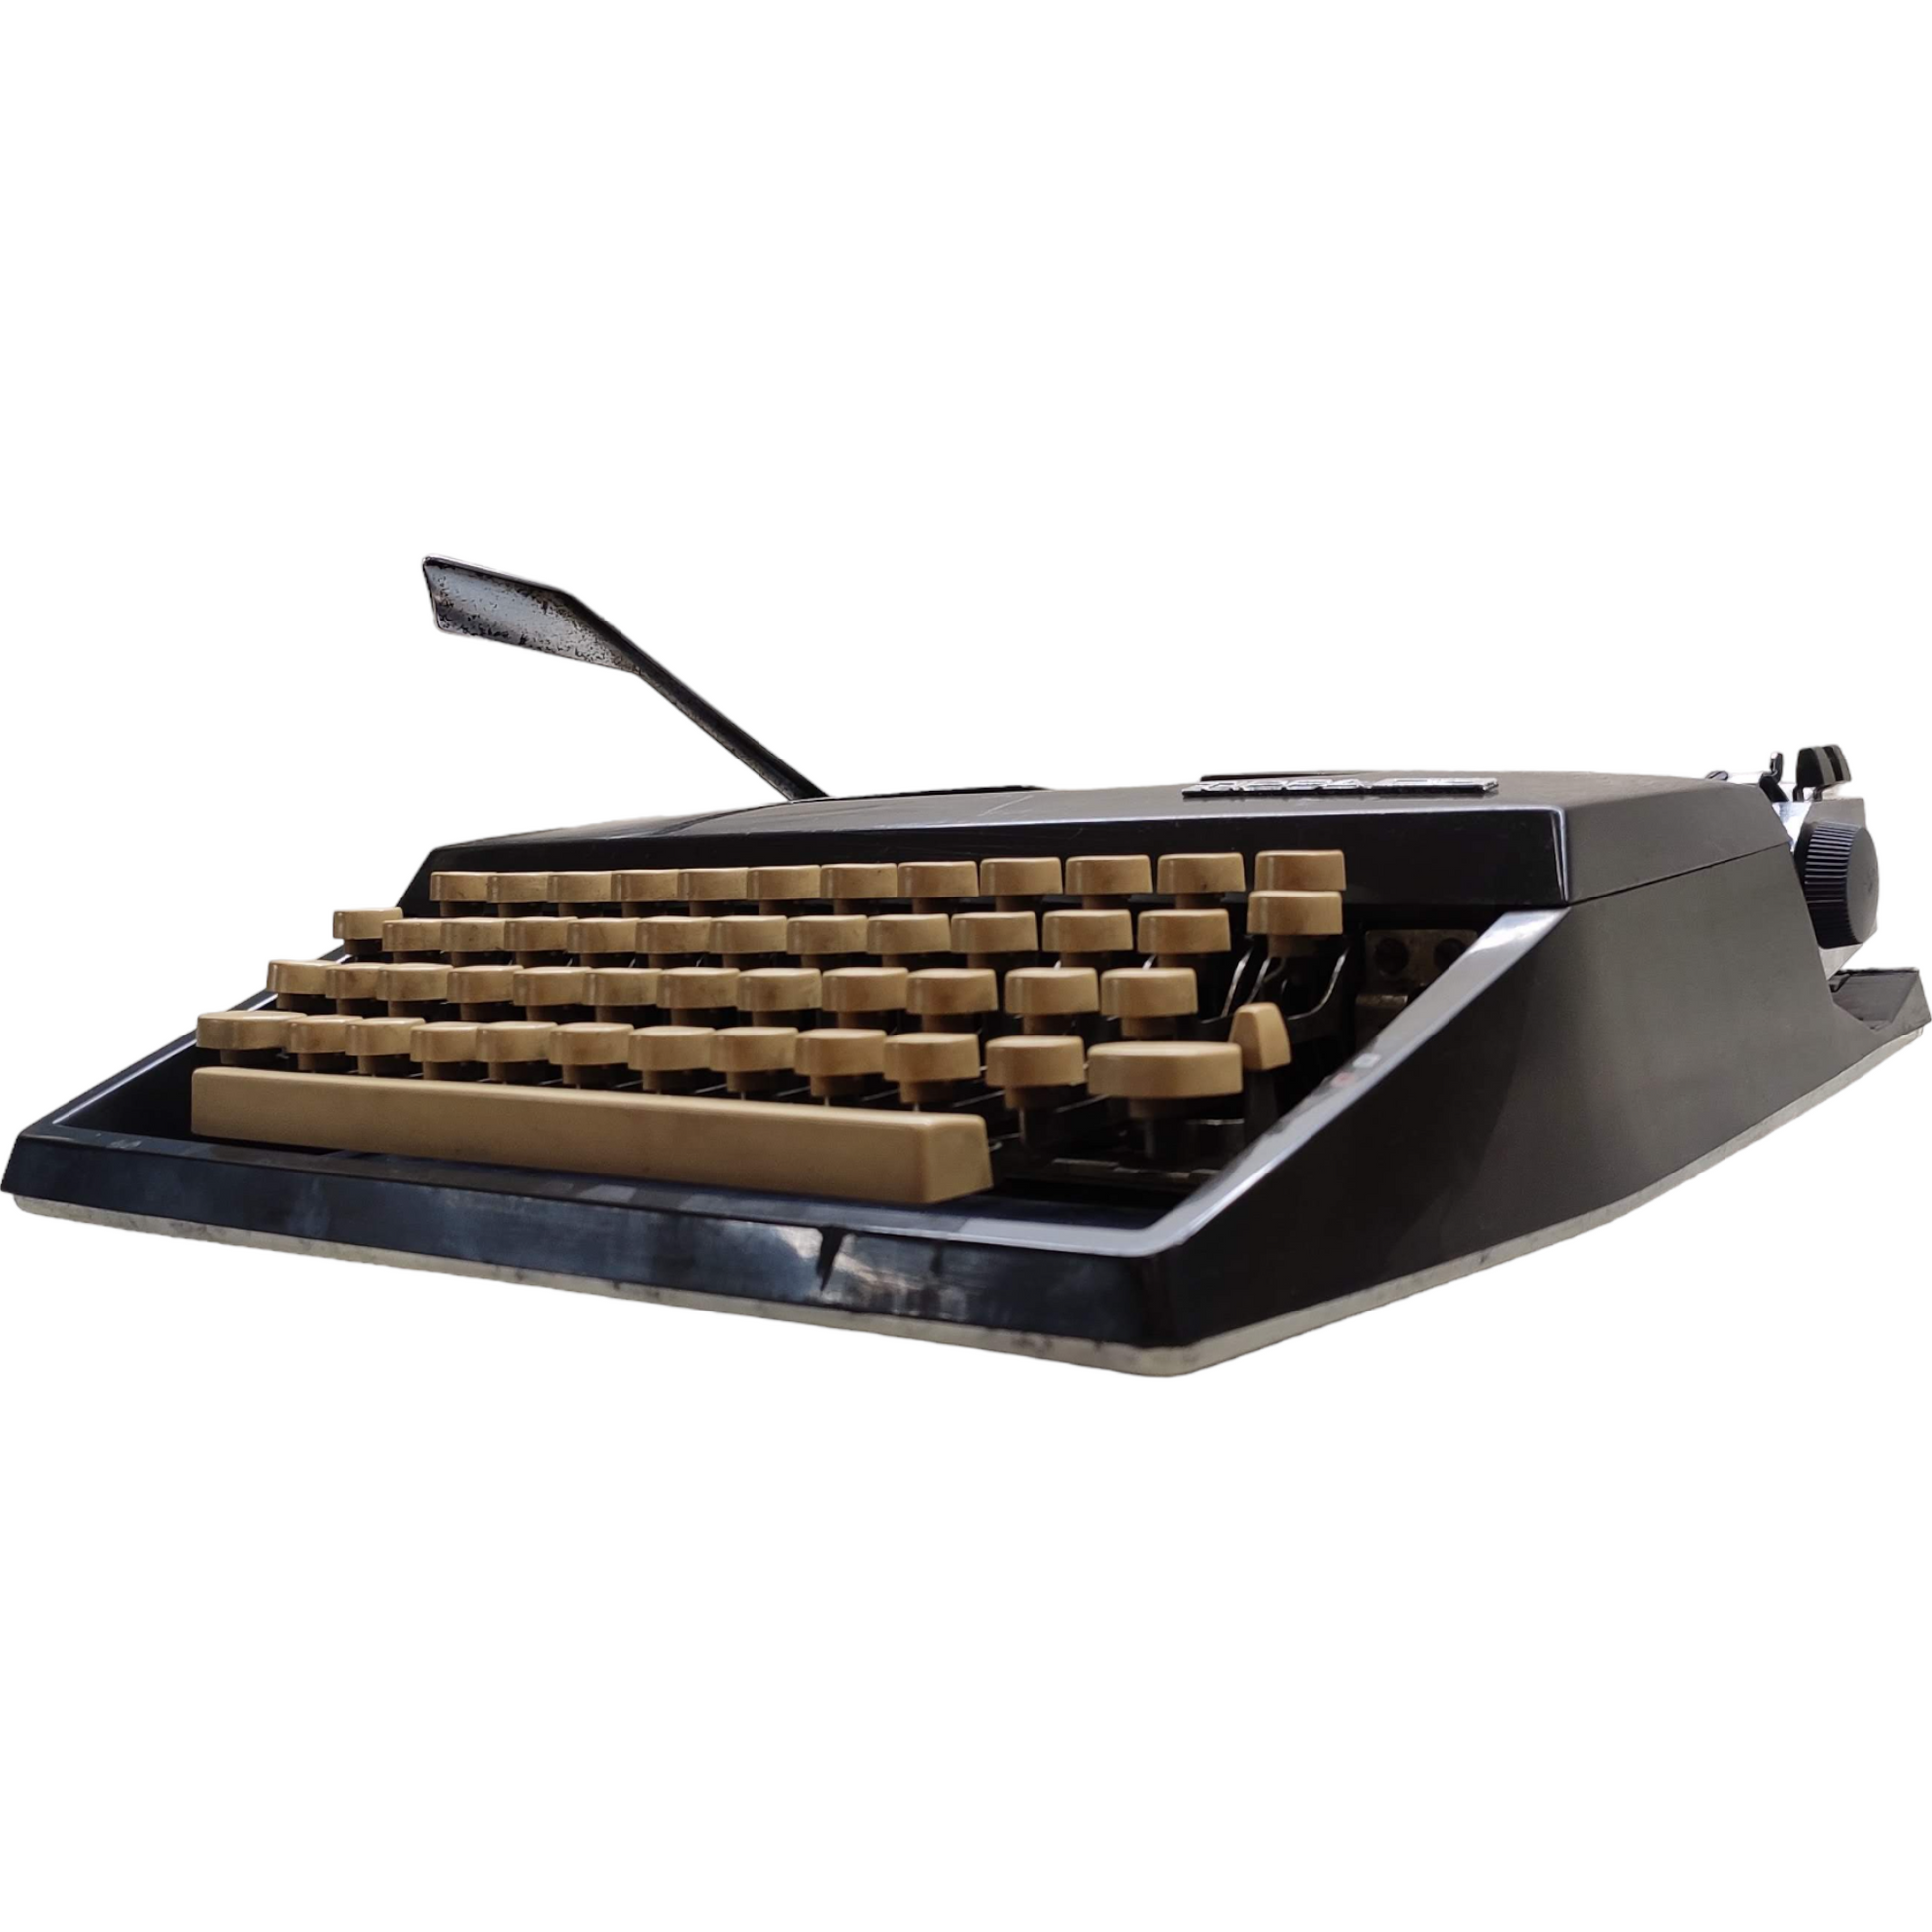 Image of Adler Tippa S Typewriter. Available from universaltypewritercompany.in